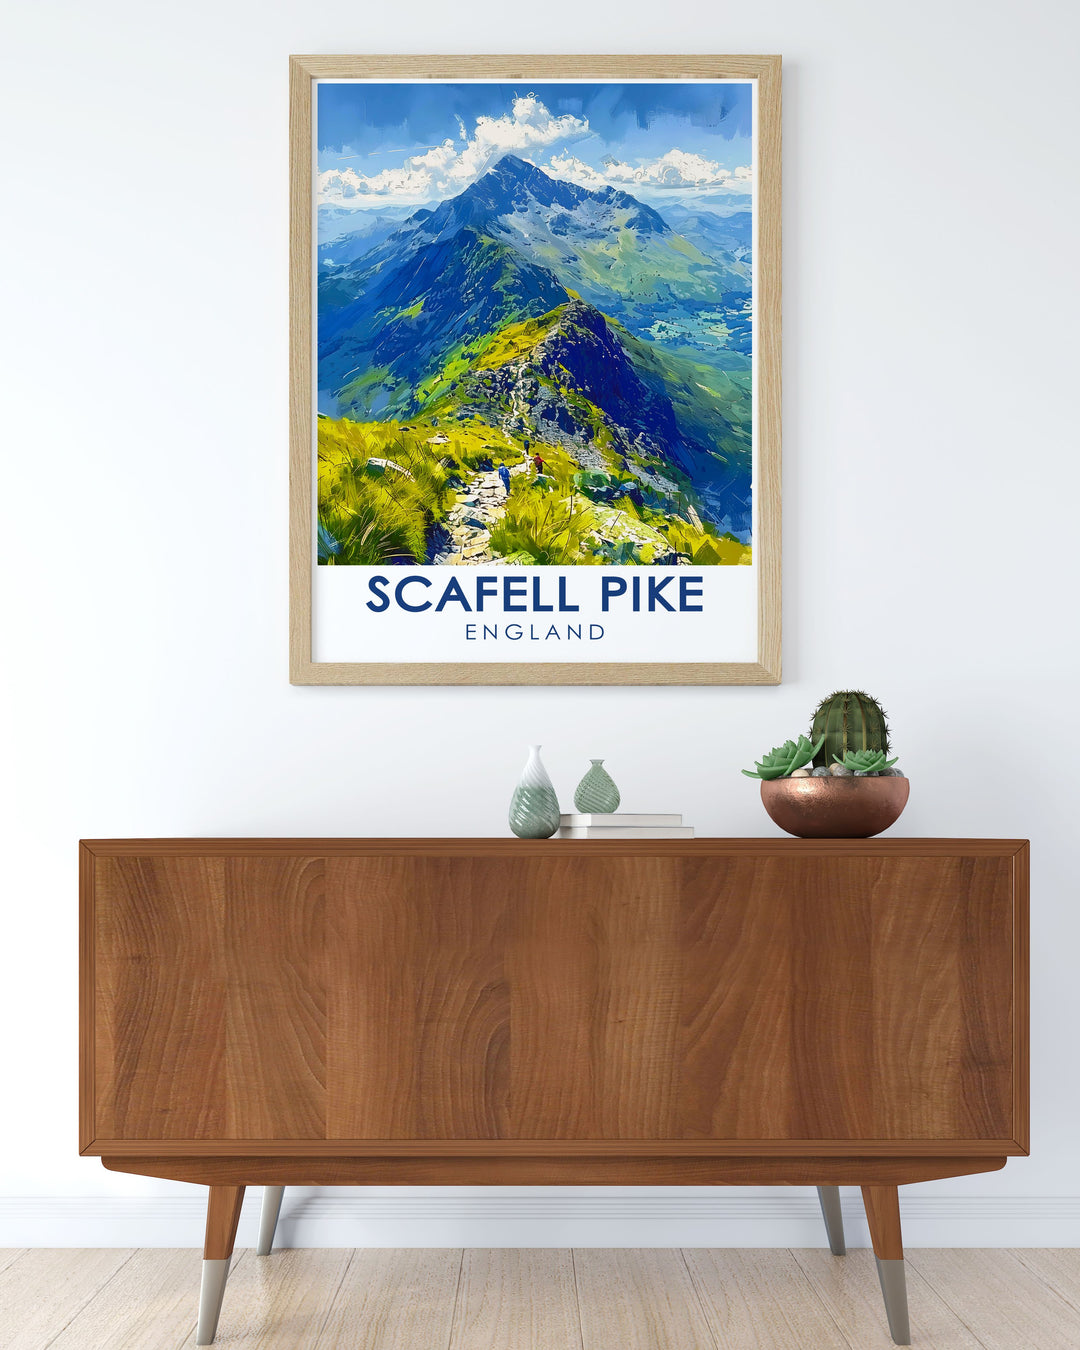 Captivating Scafell Pike poster, illustrating the serene beauty and challenging paths of the Corridor Route, perfect for inspiring your next adventure or commemorating a past hike.